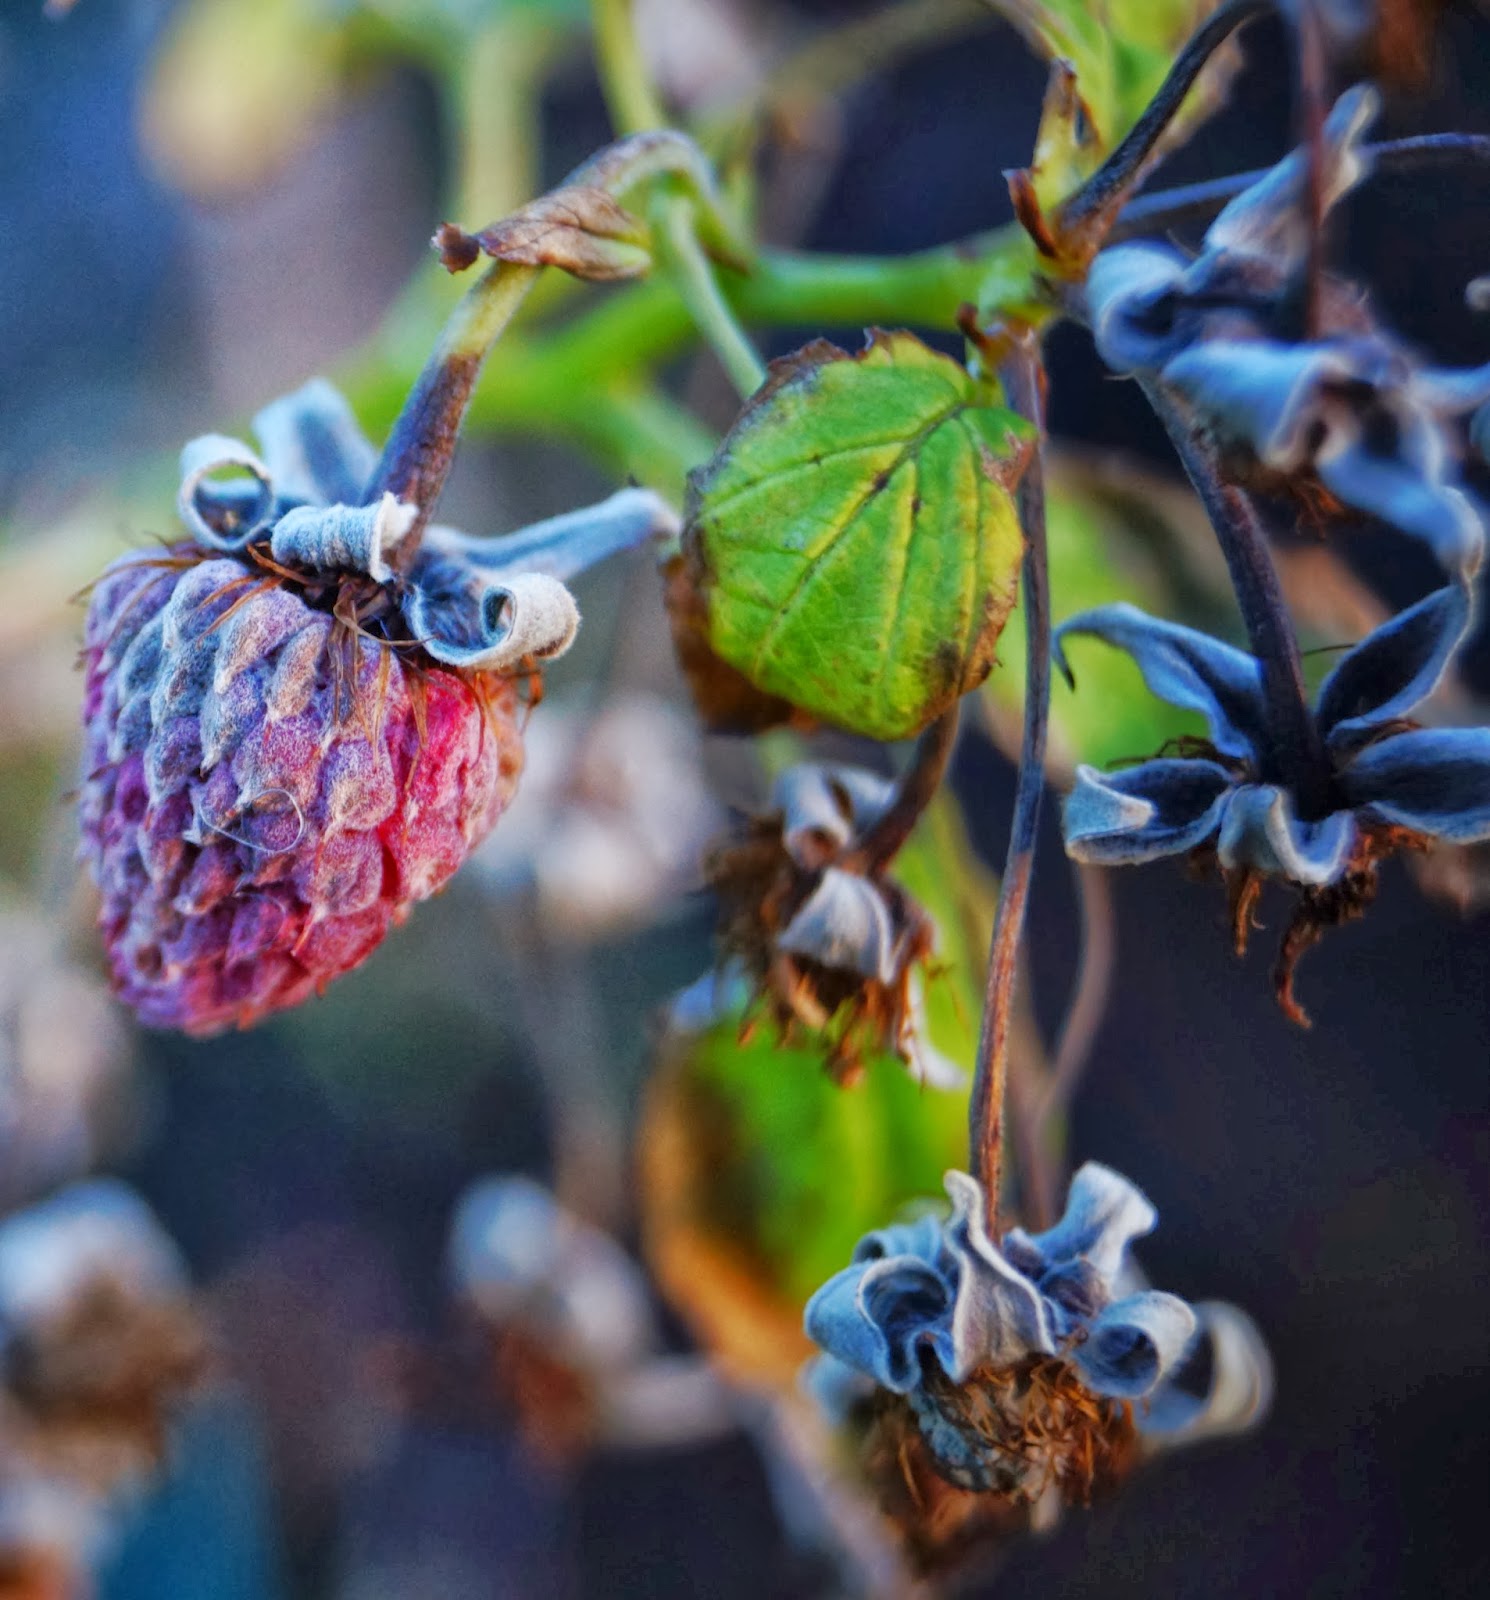 Freeze dried raspberries on the plant - 'Grow Our Own' Allotment Blog